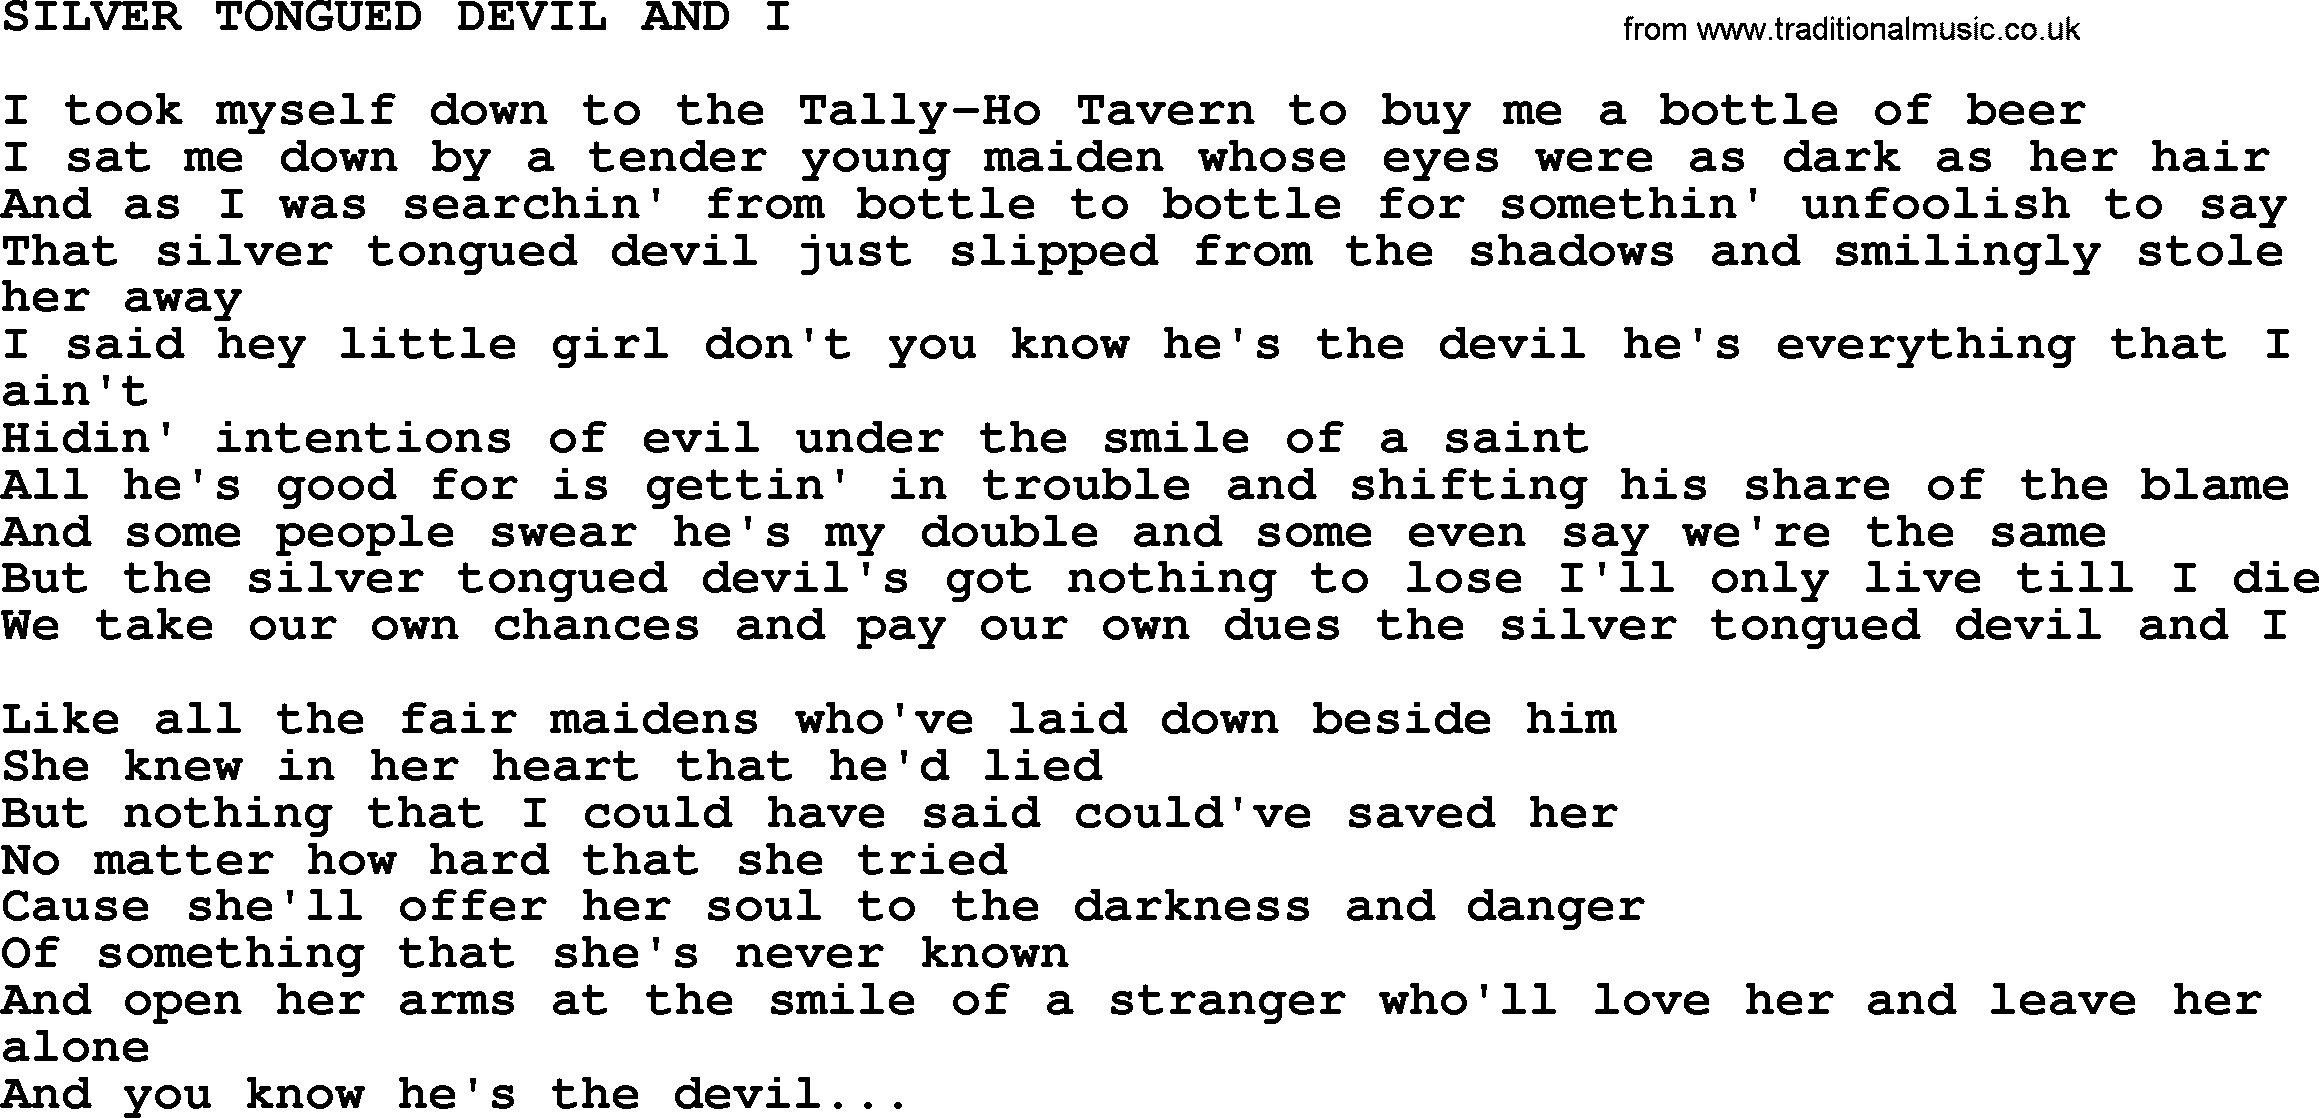 Kris Kristofferson song: Silver Tongued Devil And I txt lyrics and chords